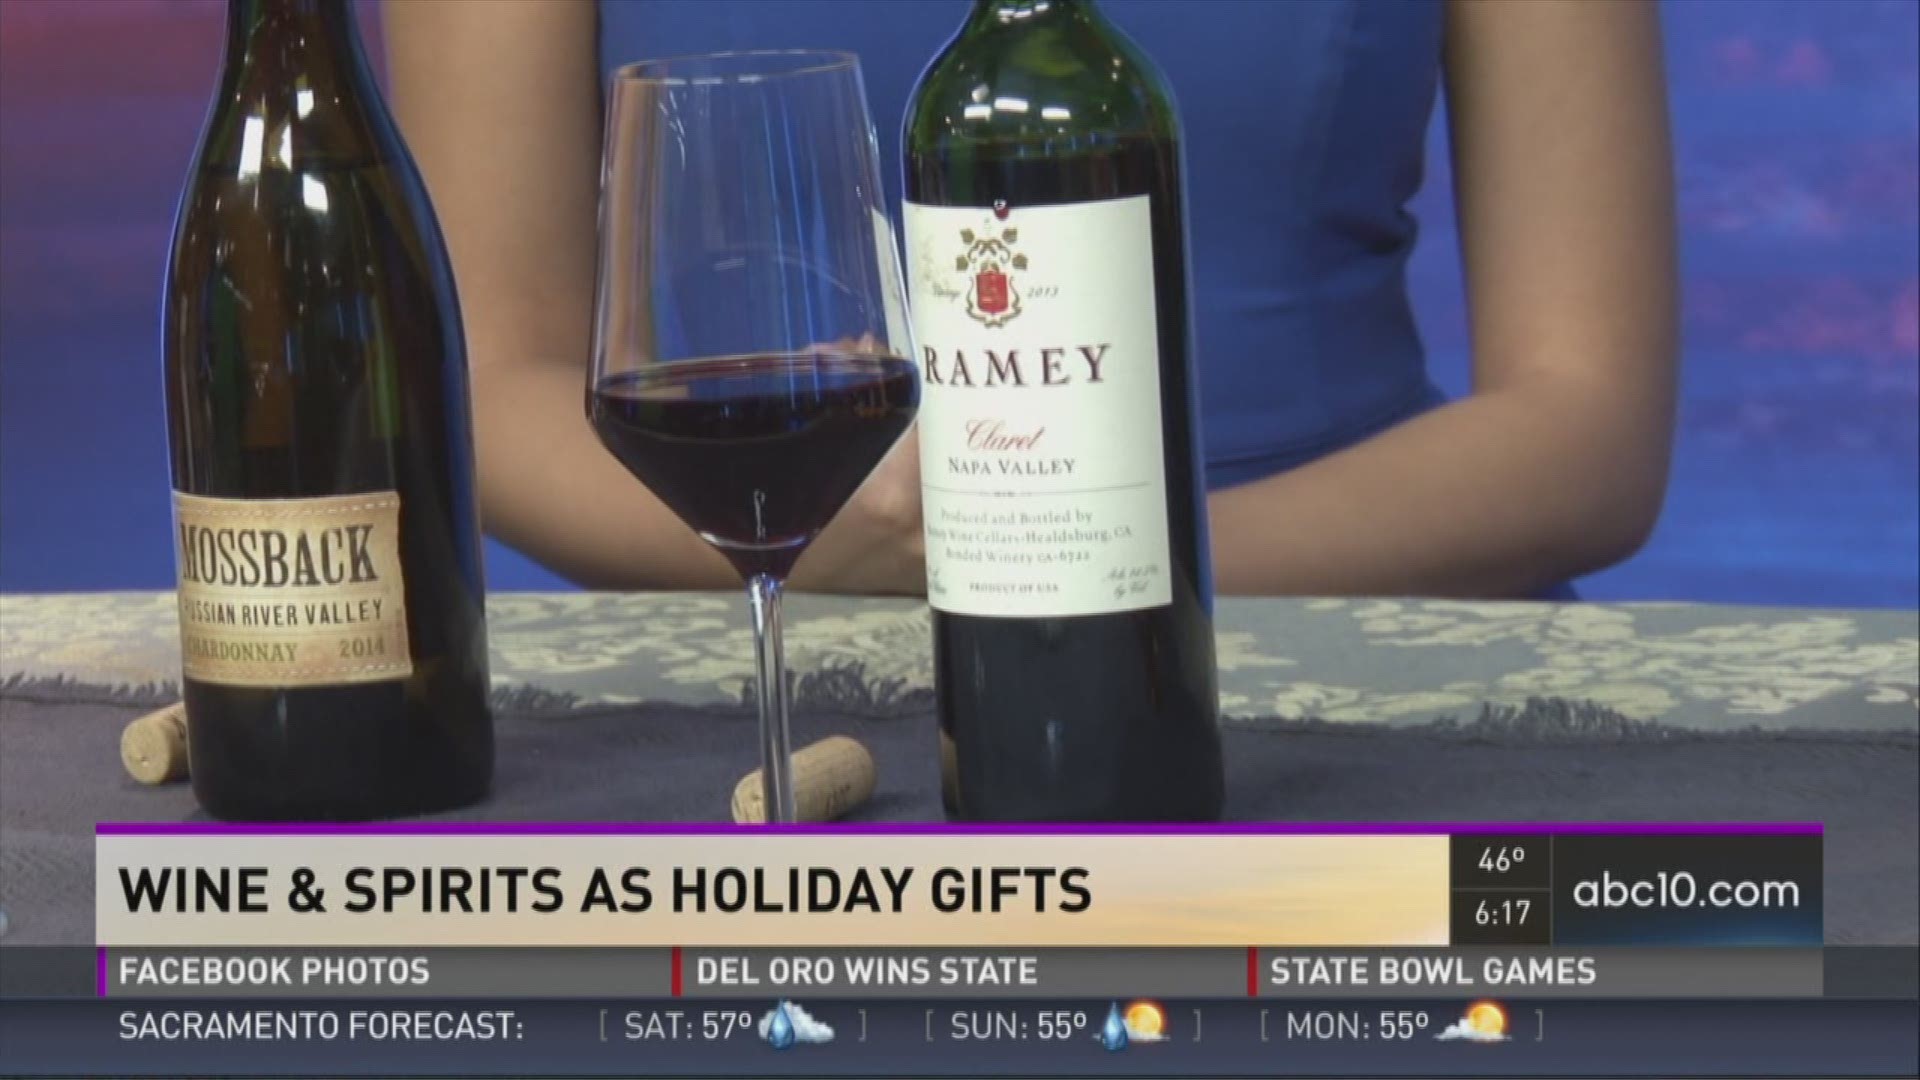 Curtis Mann, a wine and spirits expert at Raley's, shows us drink ideas to give as gifts for the holidays